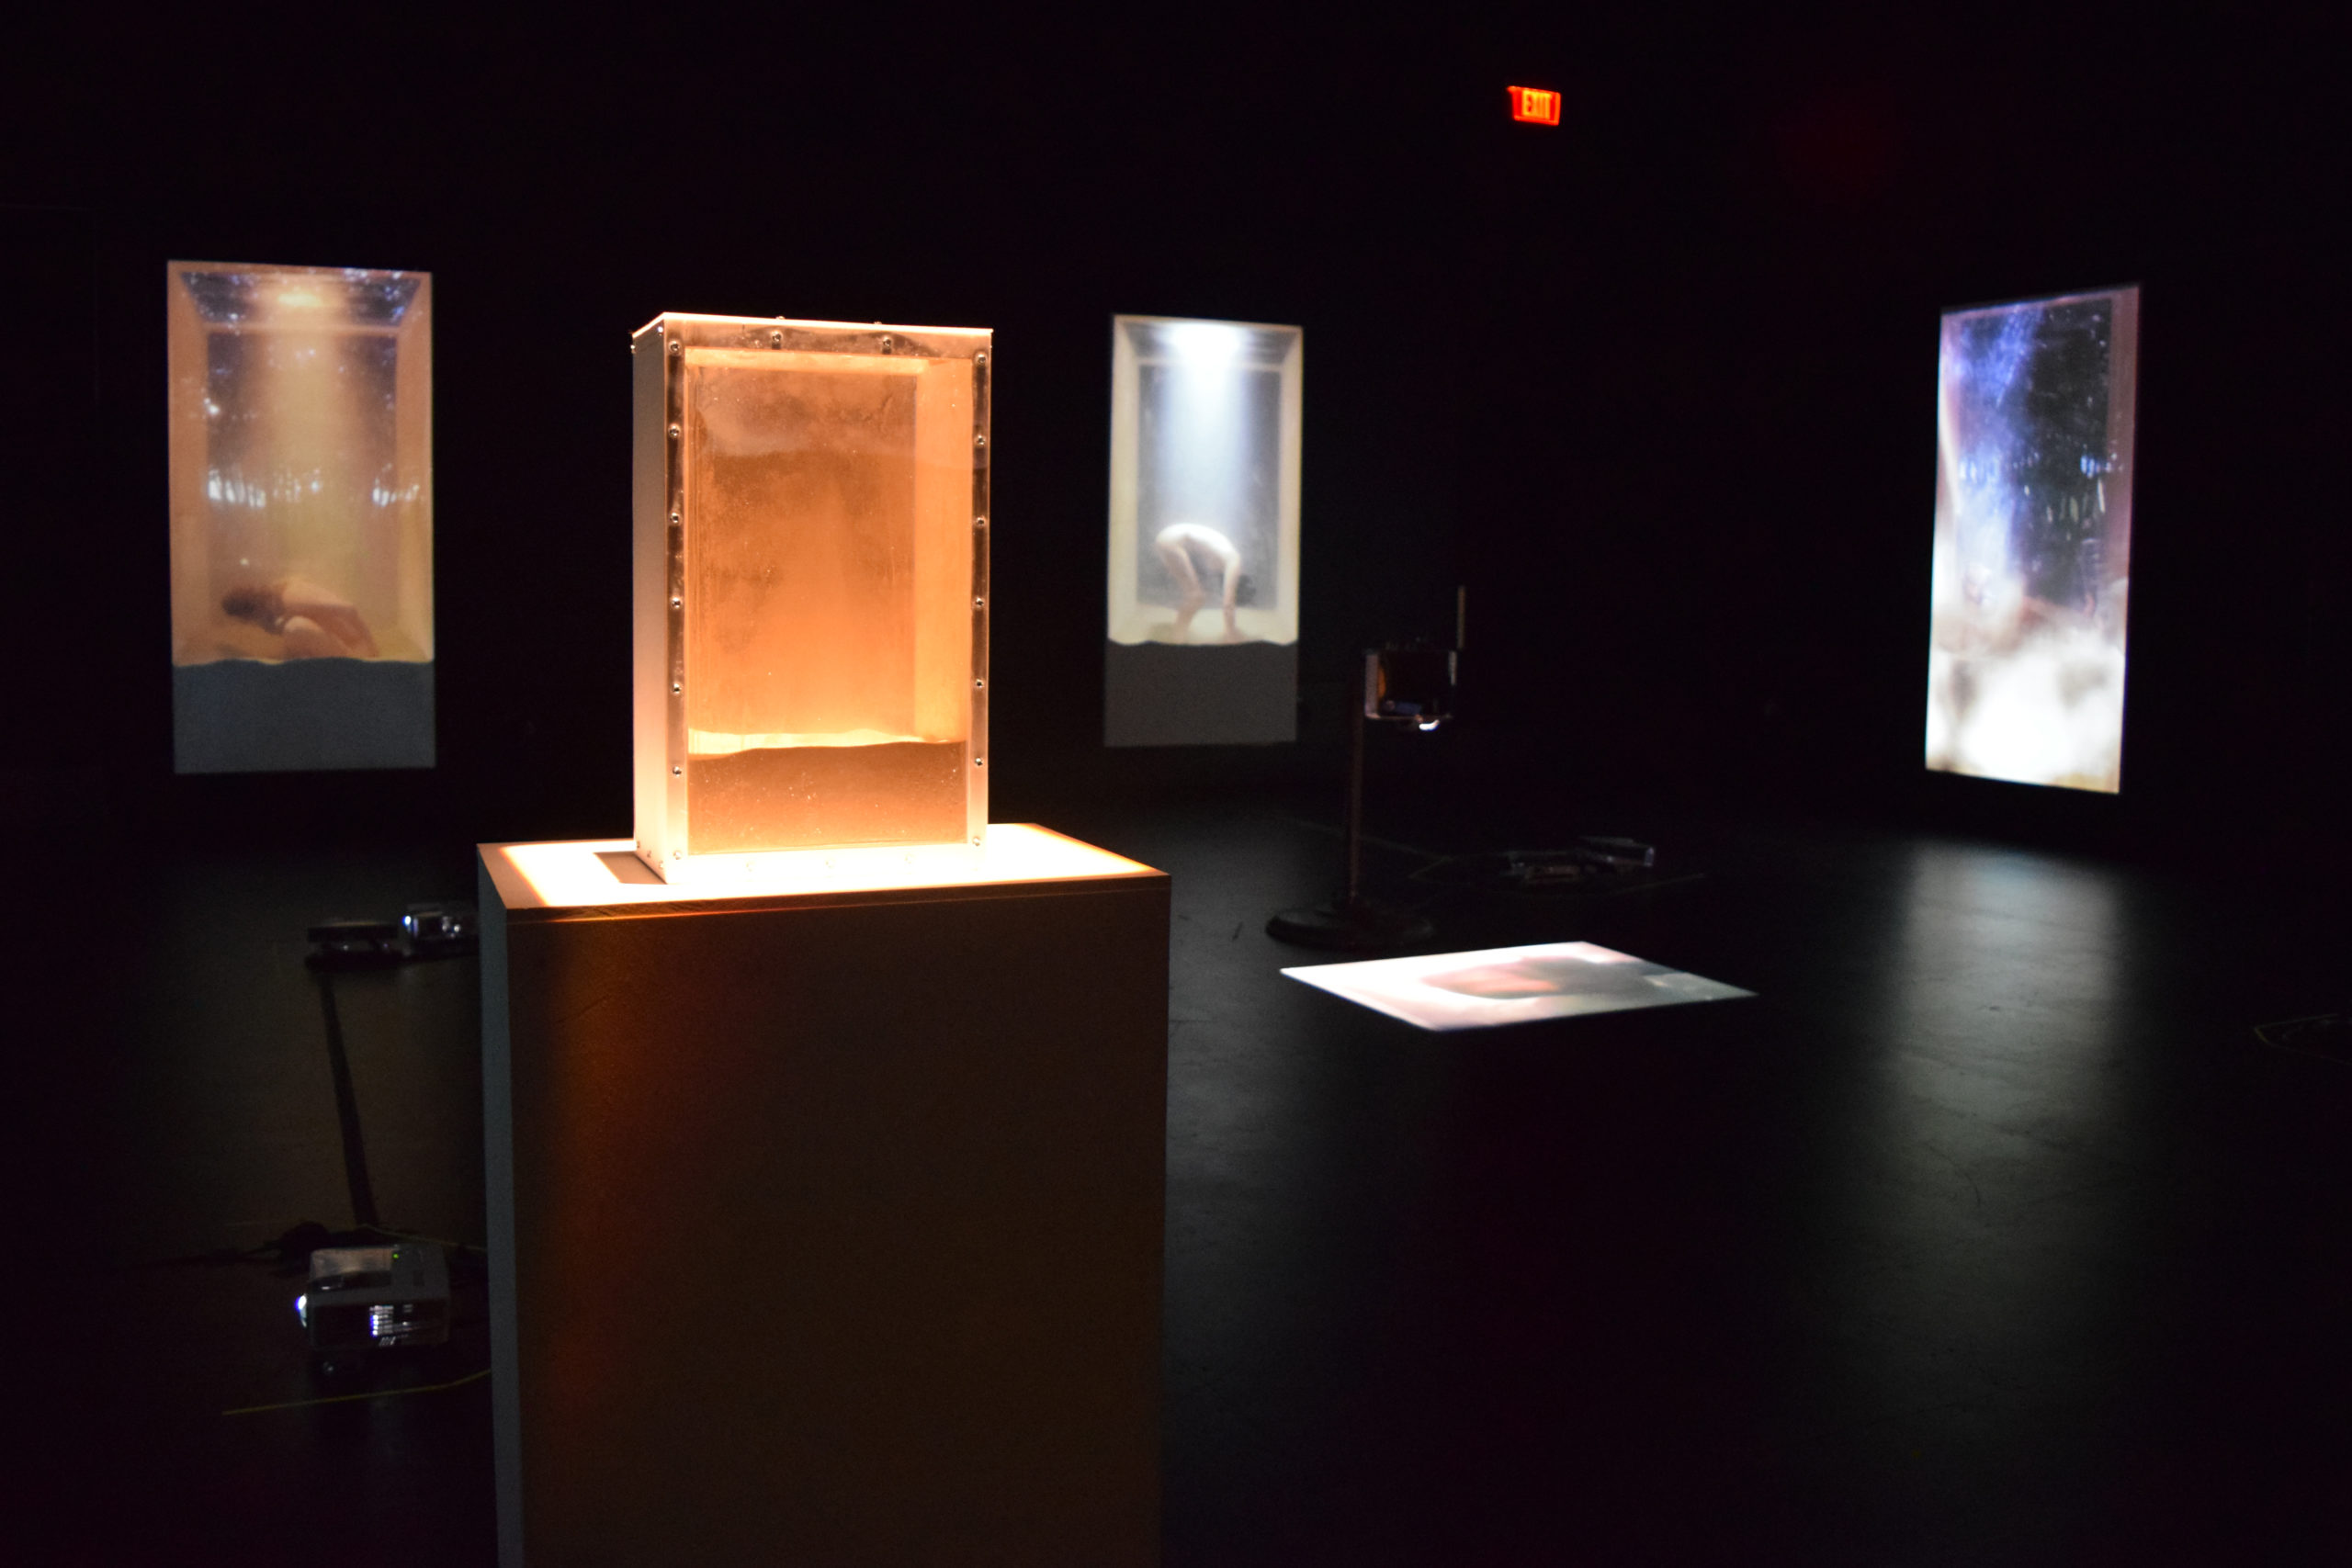 Five boxes displaying Coorespondences are lit within a dark gallery space.